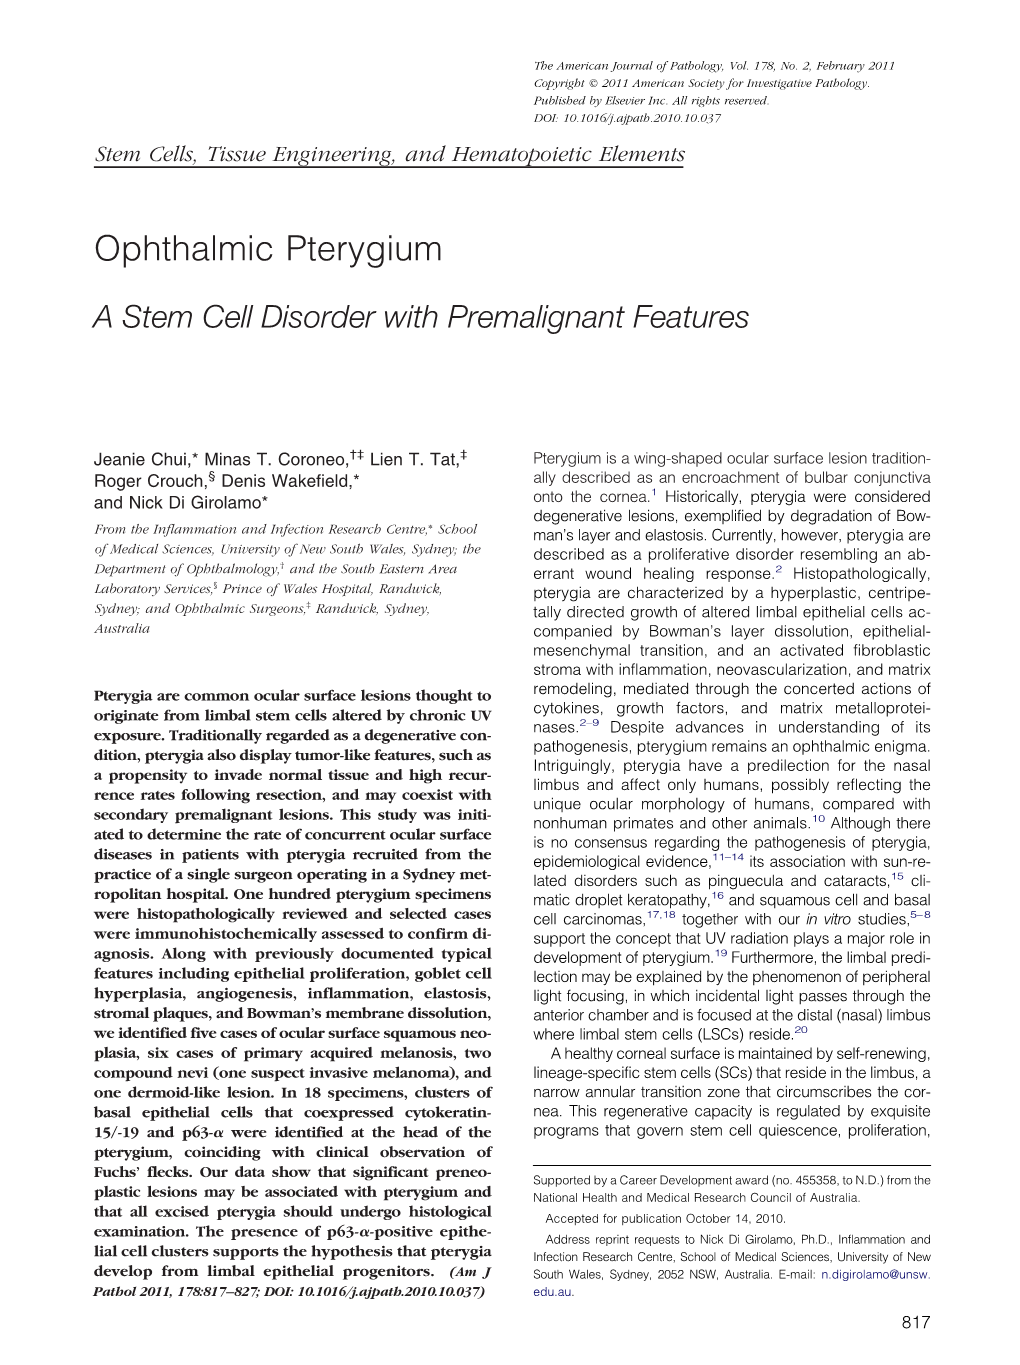 Ophthalmic Pterygium